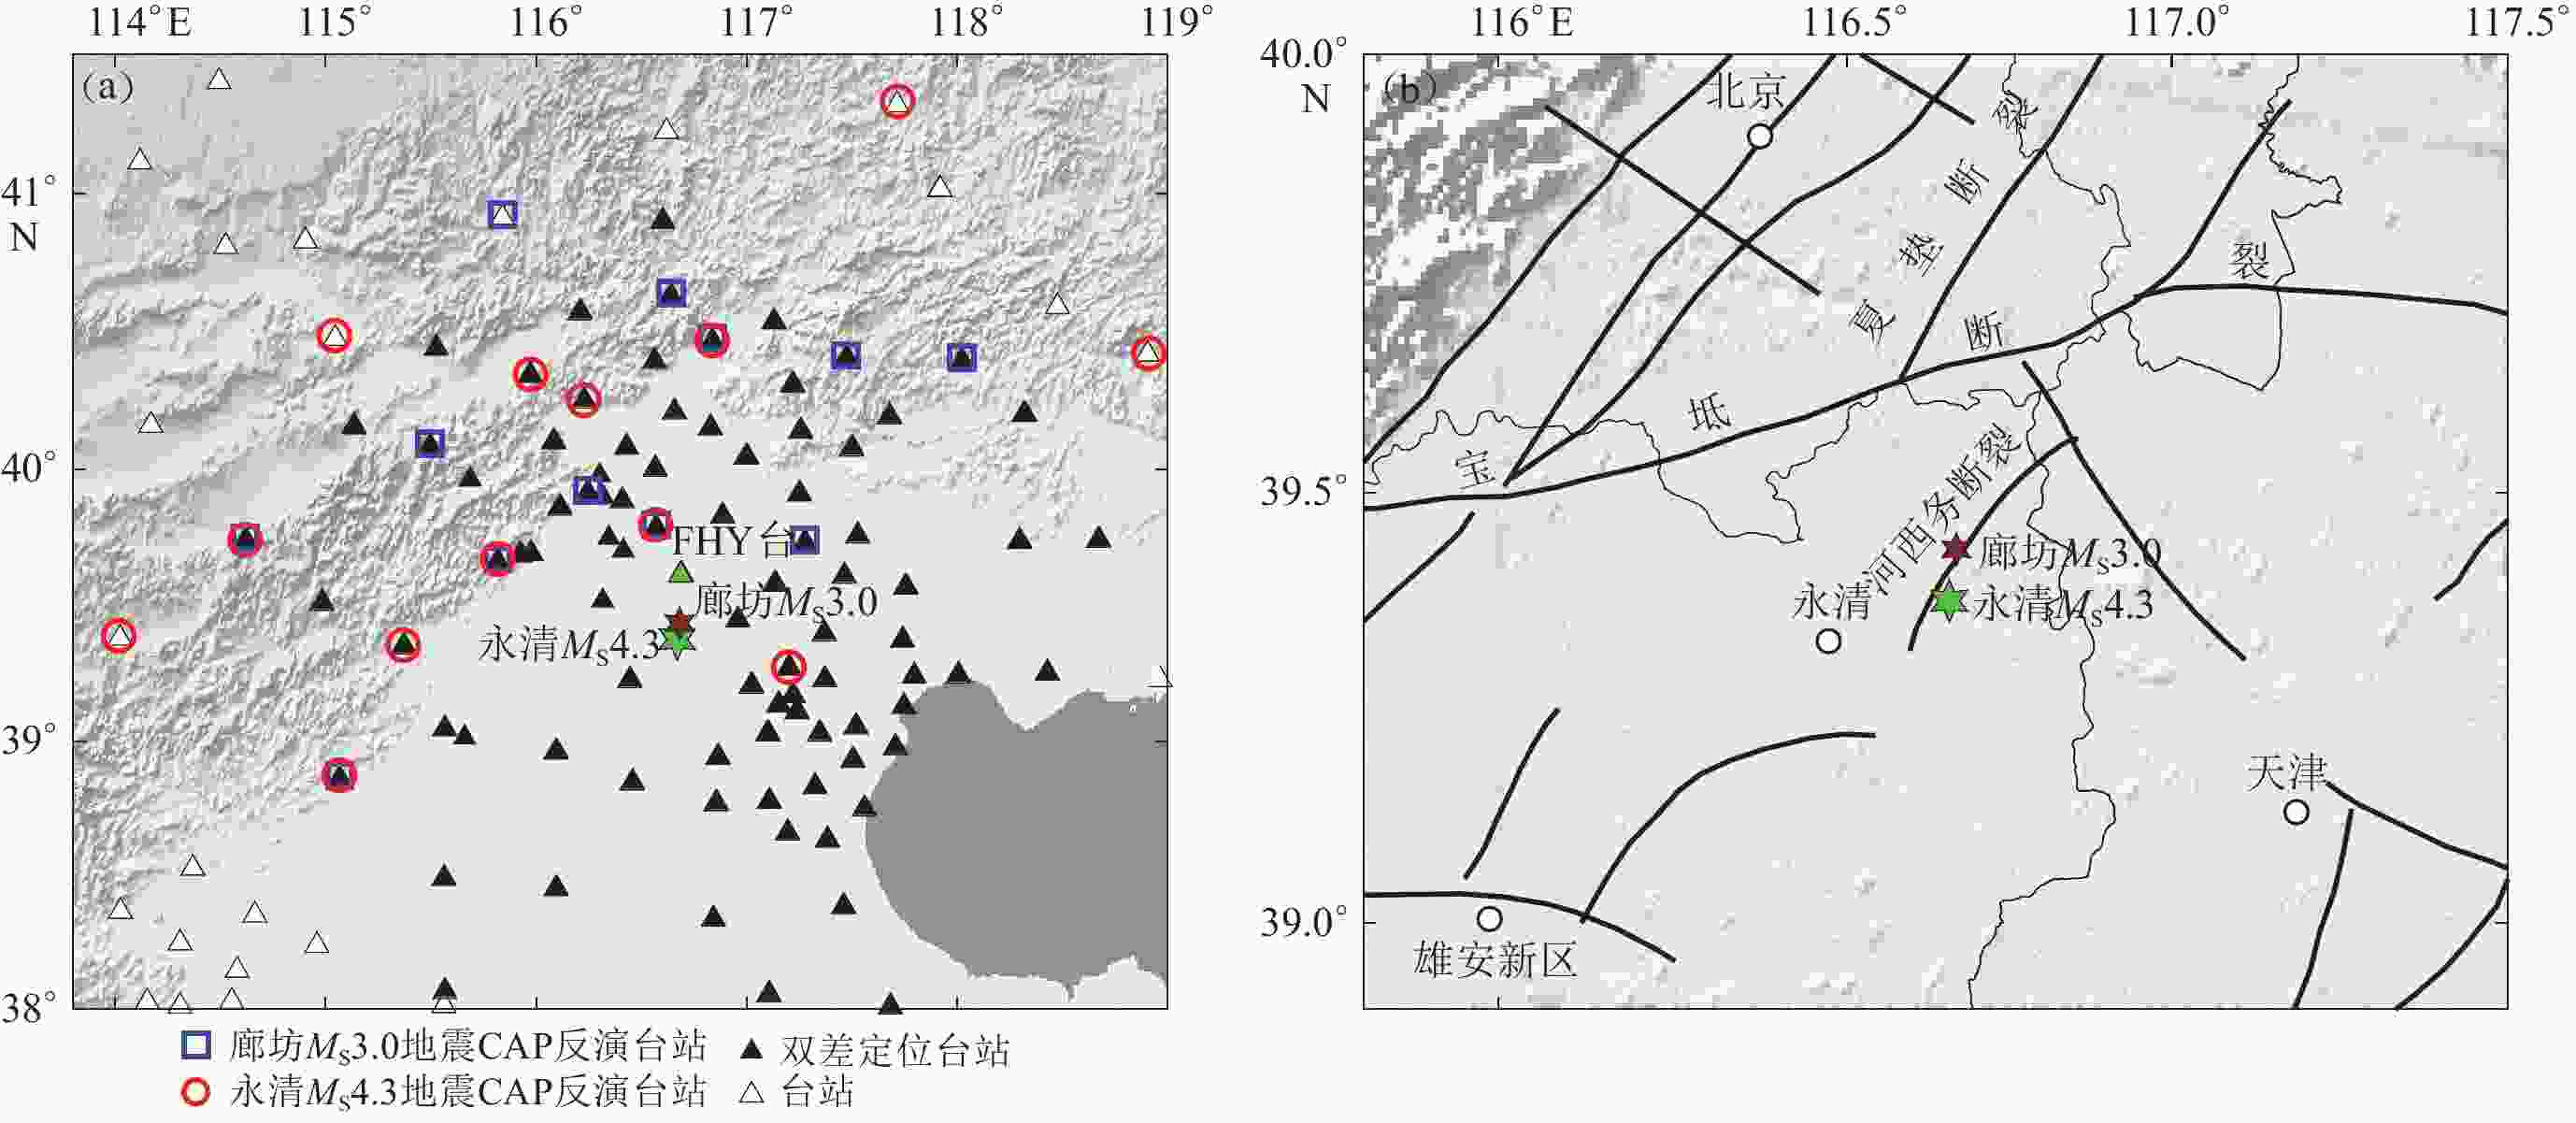 Seismogenic structure of Yongqing MS4.3 and Langfang MS3.0 earthquakes